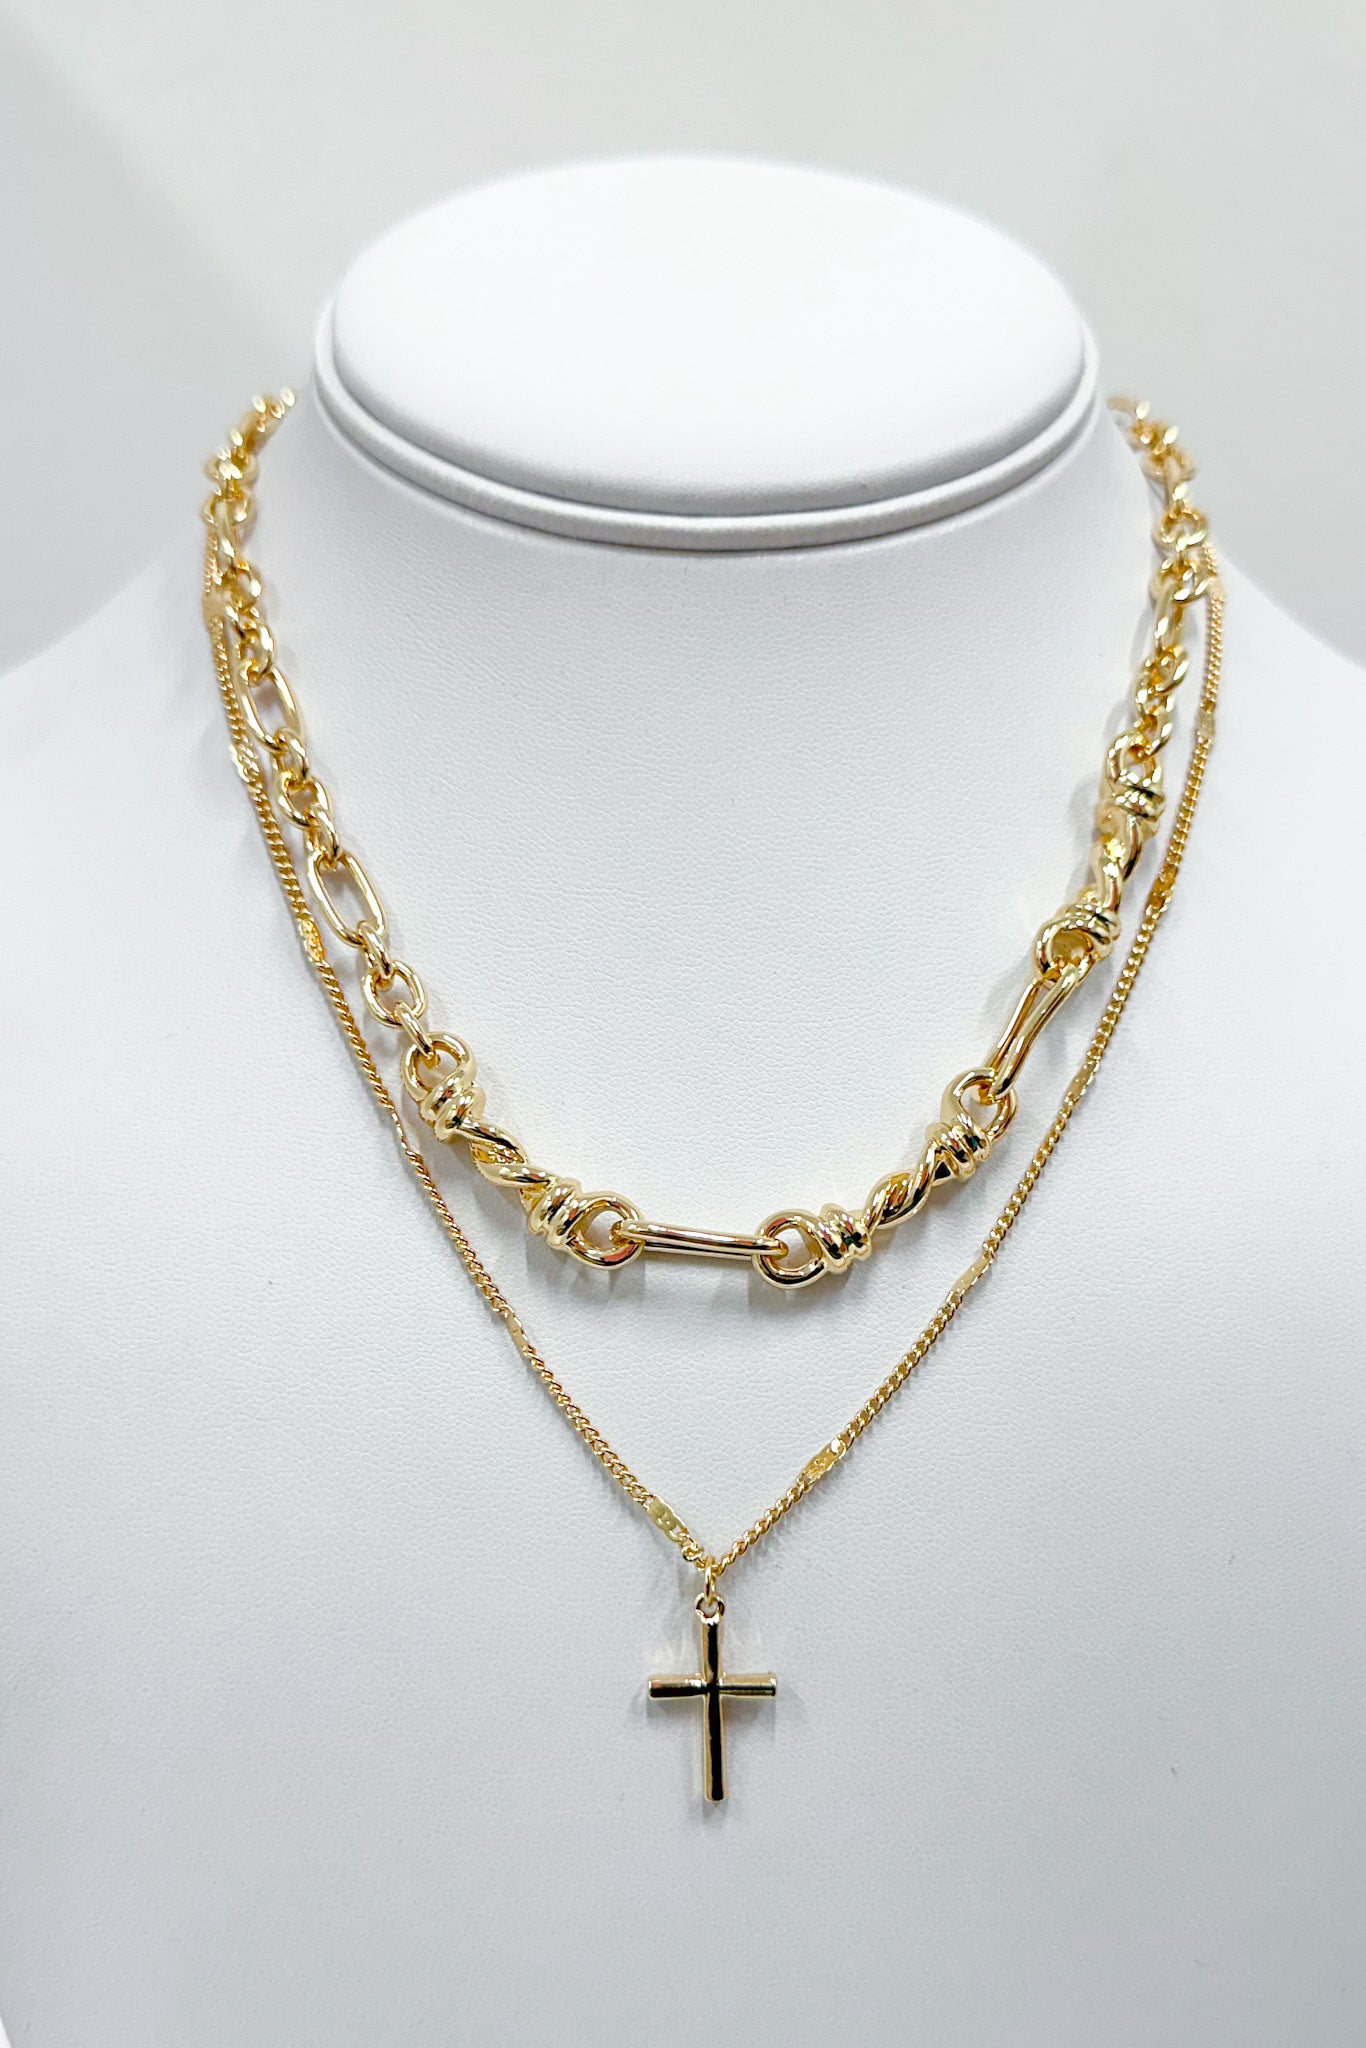  Metallic Muse Cross Layered Chain Necklace - BACK IN STOCK - Madison and Mallory